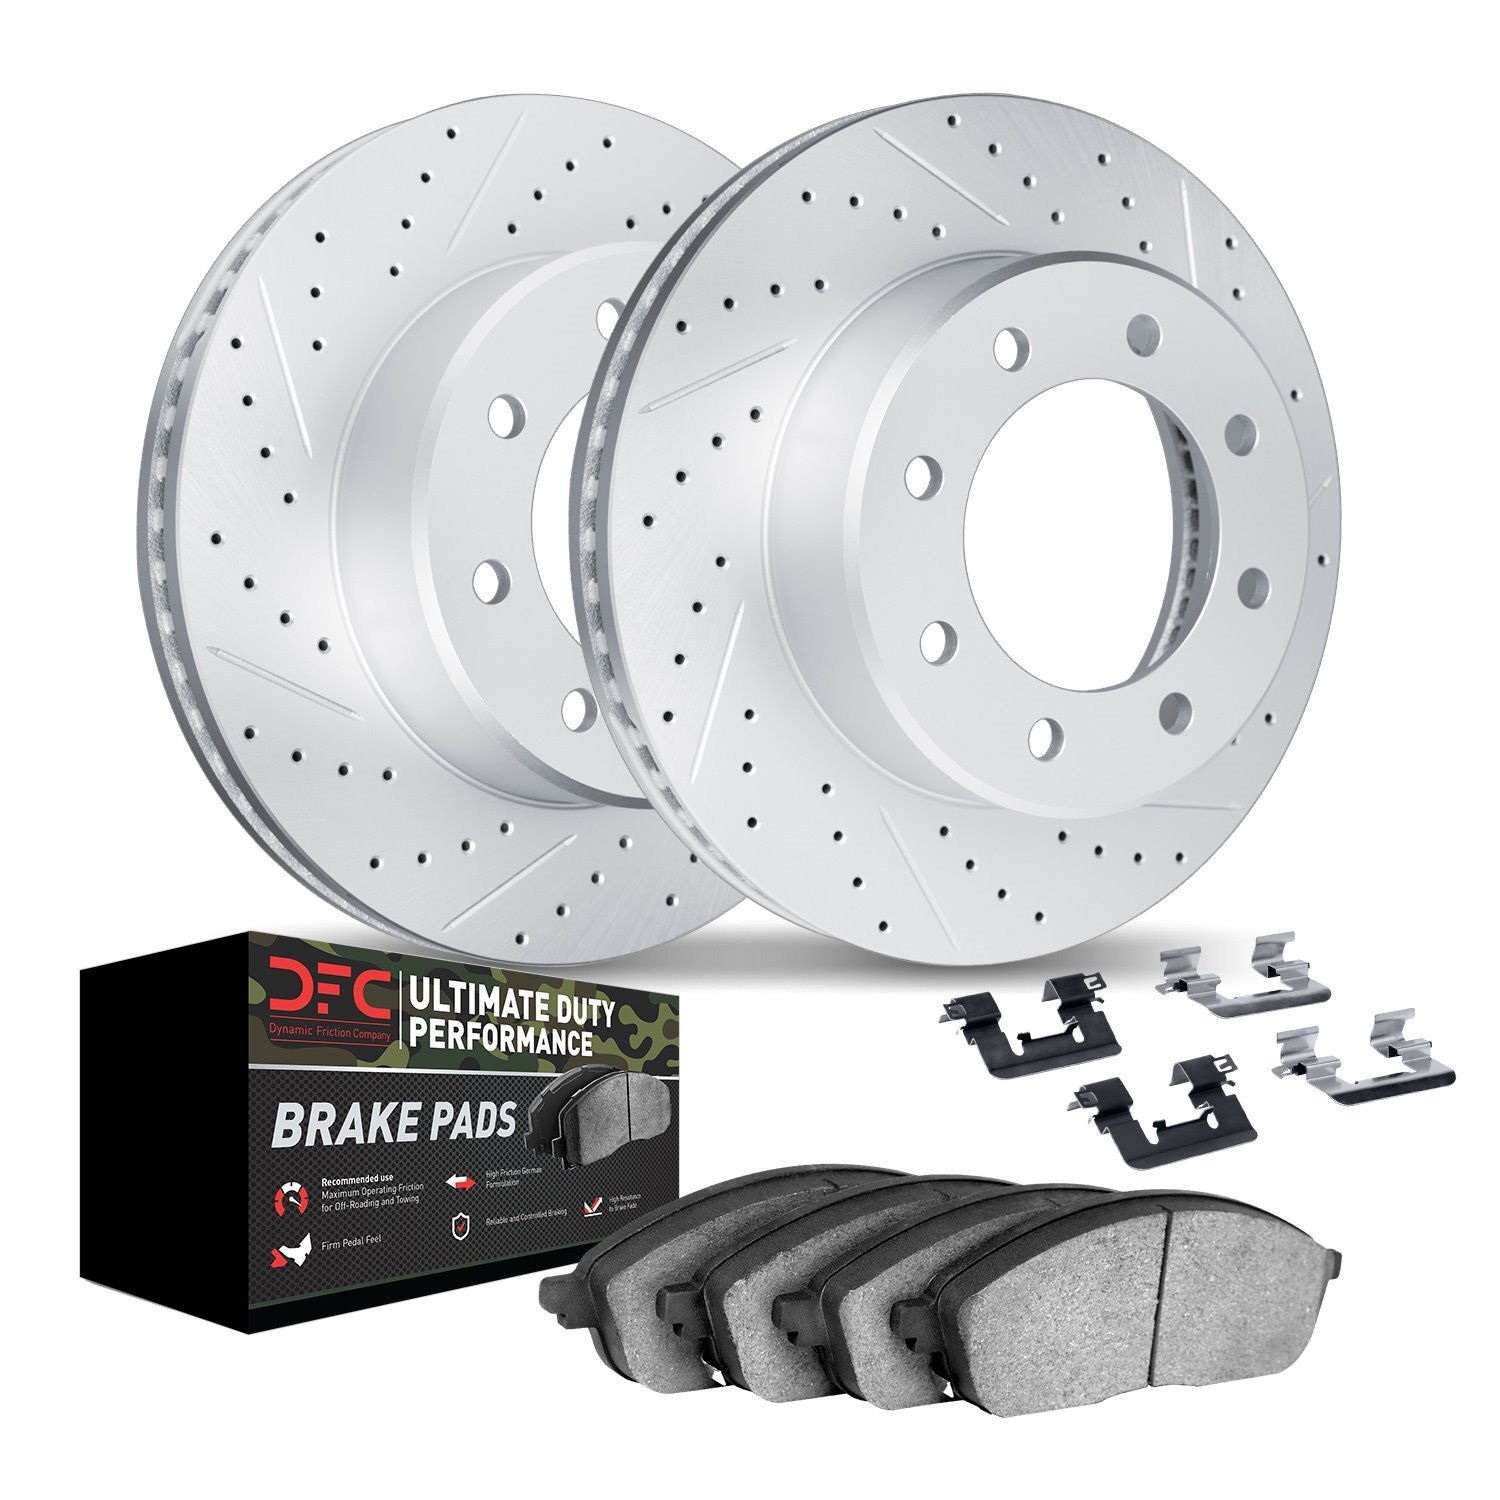 2412-48016 Geoperformance Drilled/Slotted Brake Rotors with Ultimate-Duty Brake Pads Kit & Hardware, 1999-2009 GM, Position: Rea